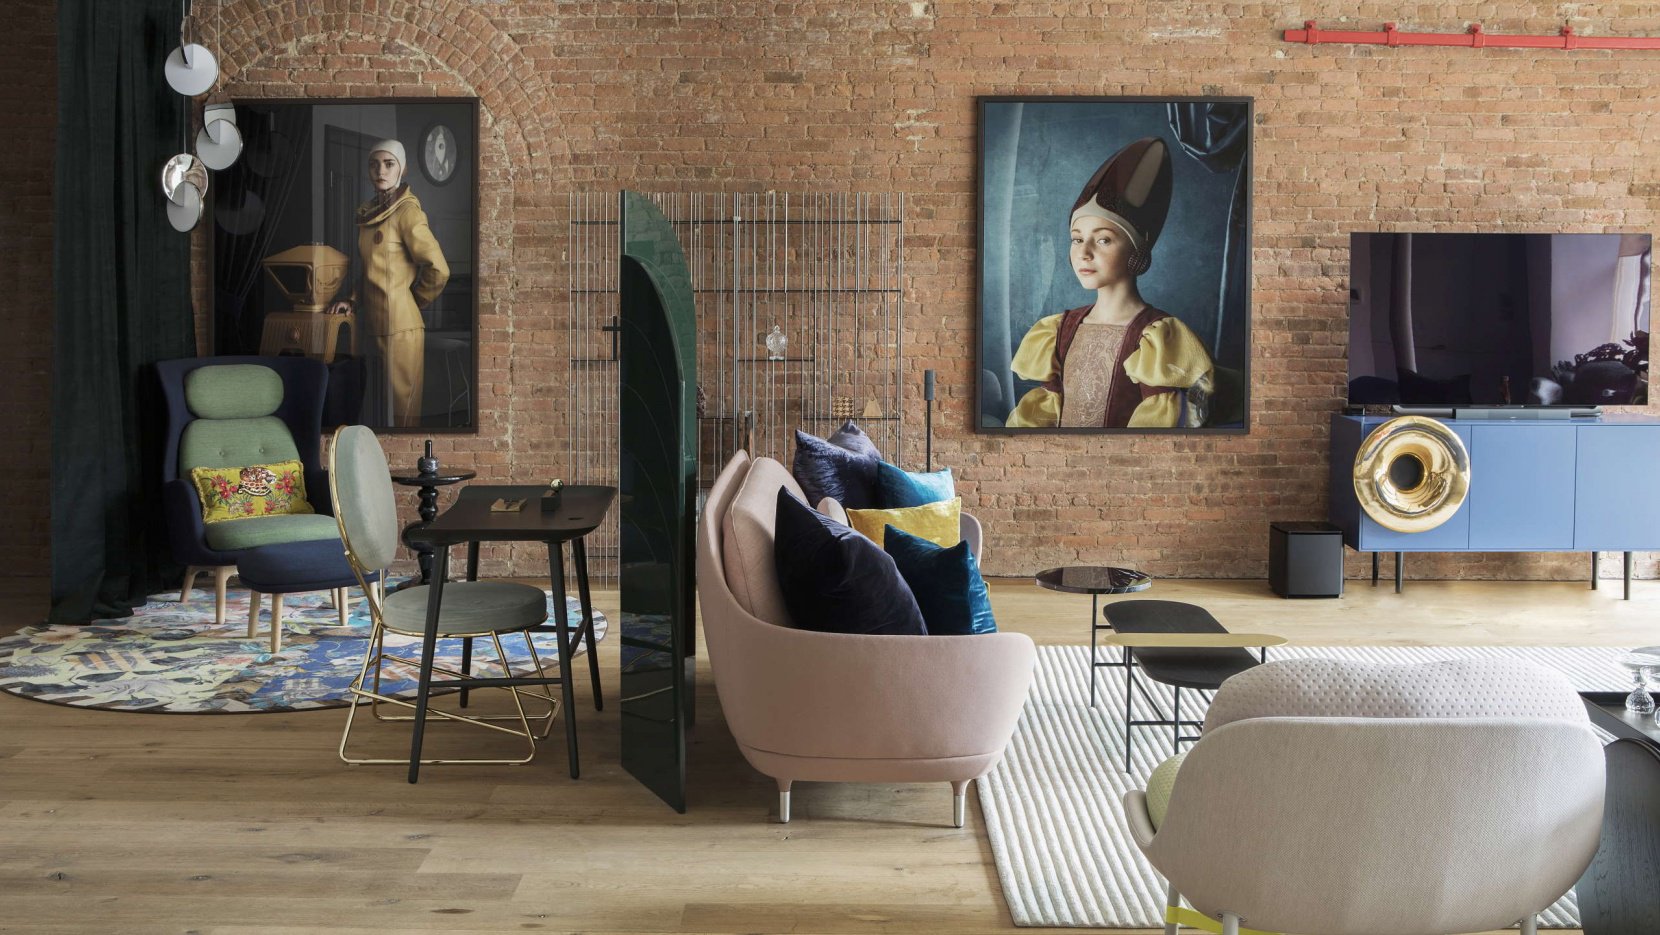 Just look how vintage and modern furniture, screens, lamps mix up with bold and amazing artworks